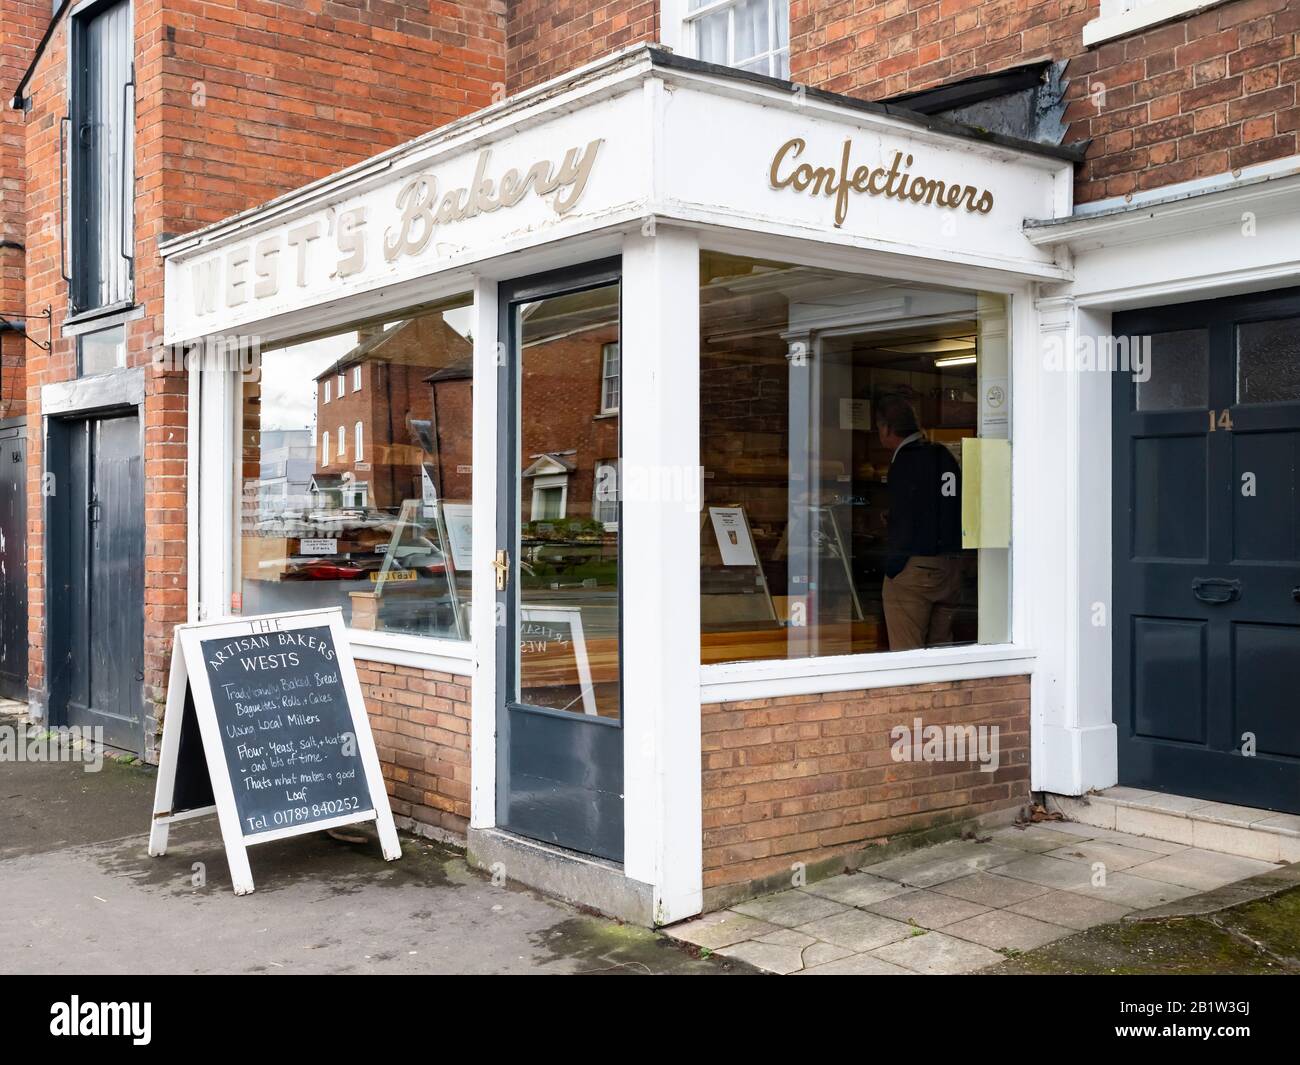 West's Bakery in Wellesbourne, a 100 year old family business baking preservative-free bread and cakes on the premises. Stock Photo